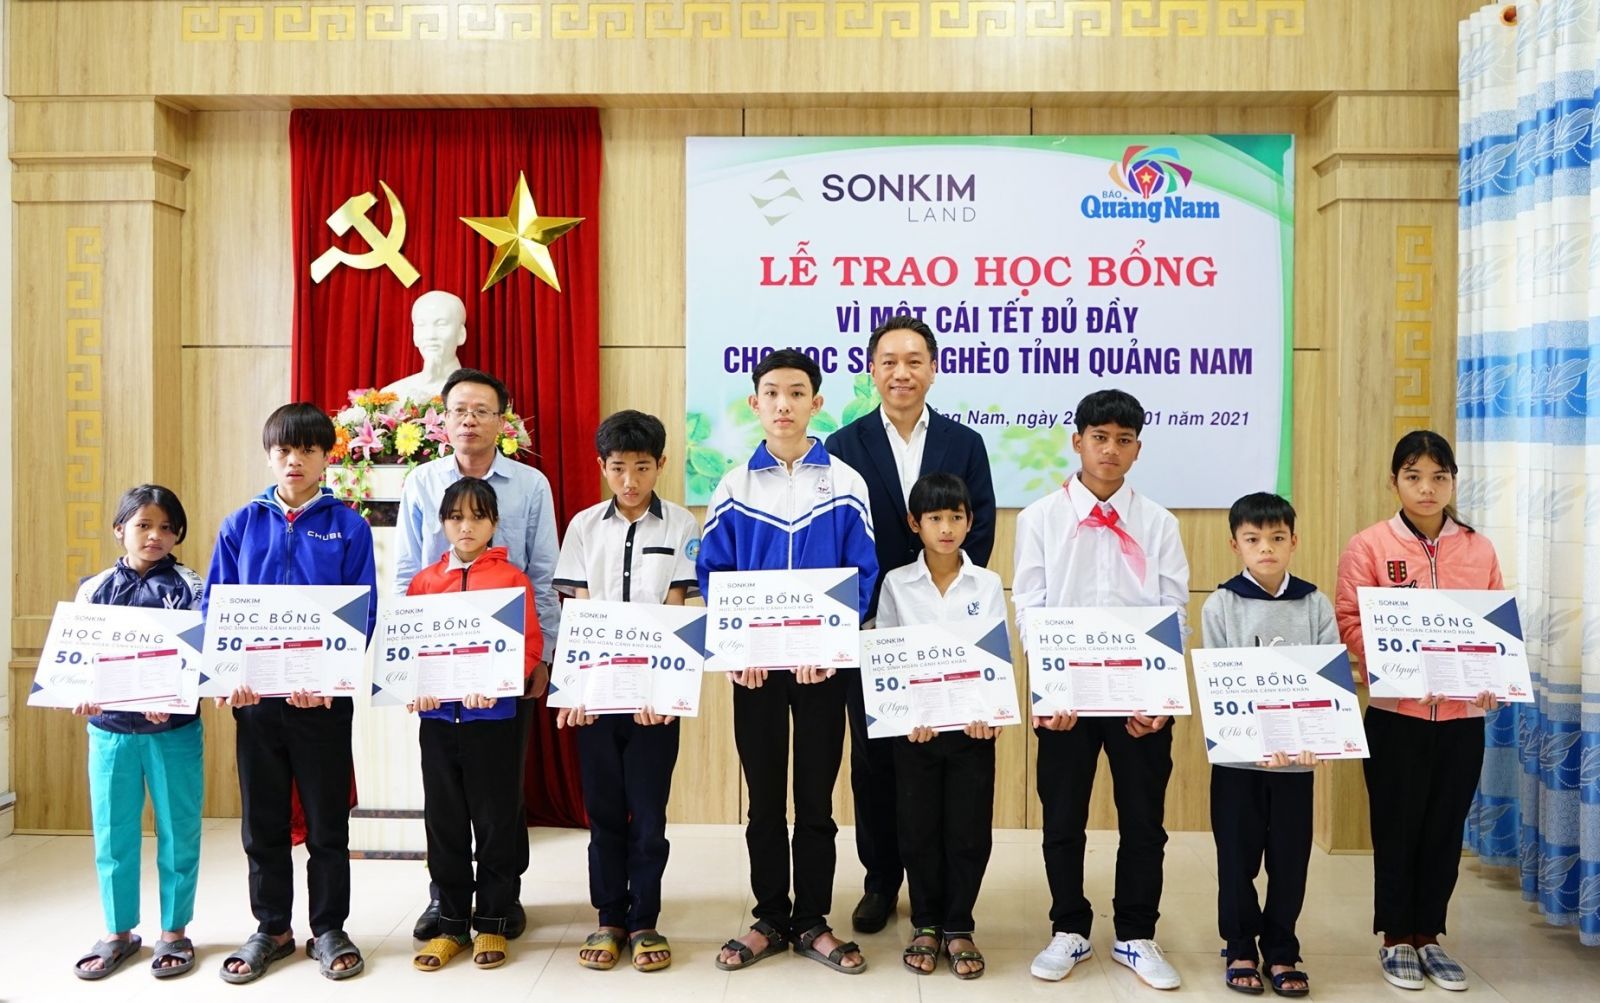 SonKim Land awards scholarships to disadvantaged students in Quang Nam for a happy Tet